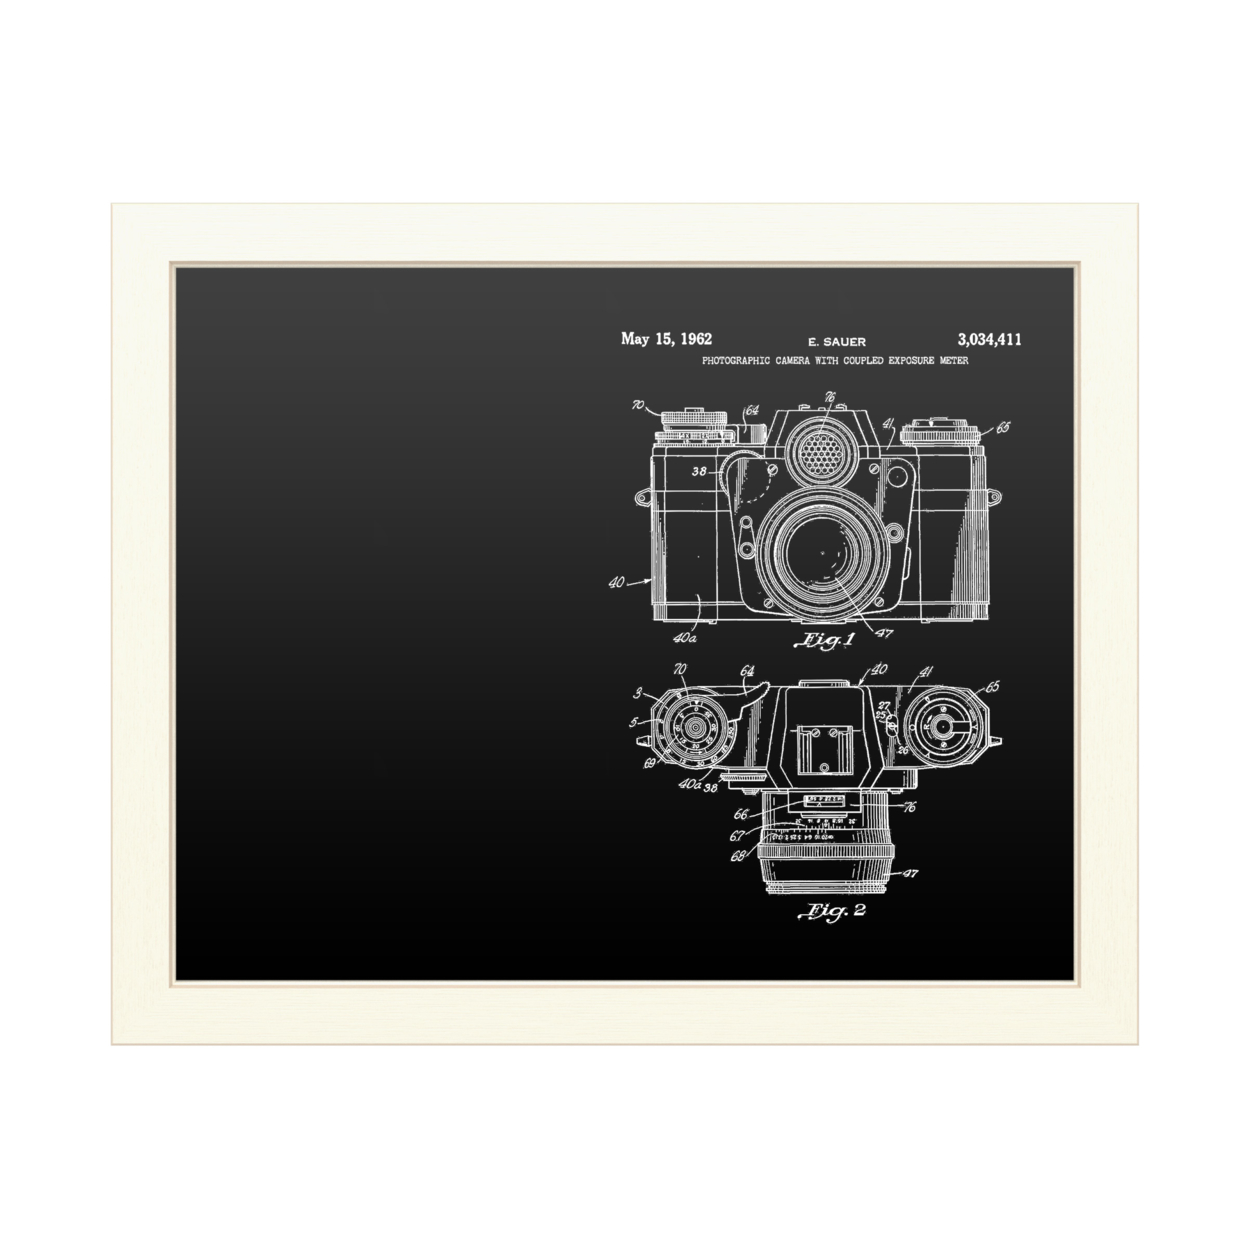 16 X 20 Chalk Board With Printed Artwork - Claire Doherty Photographic Camera Patent 1962 White Board - Ready To Hang Chalkboard